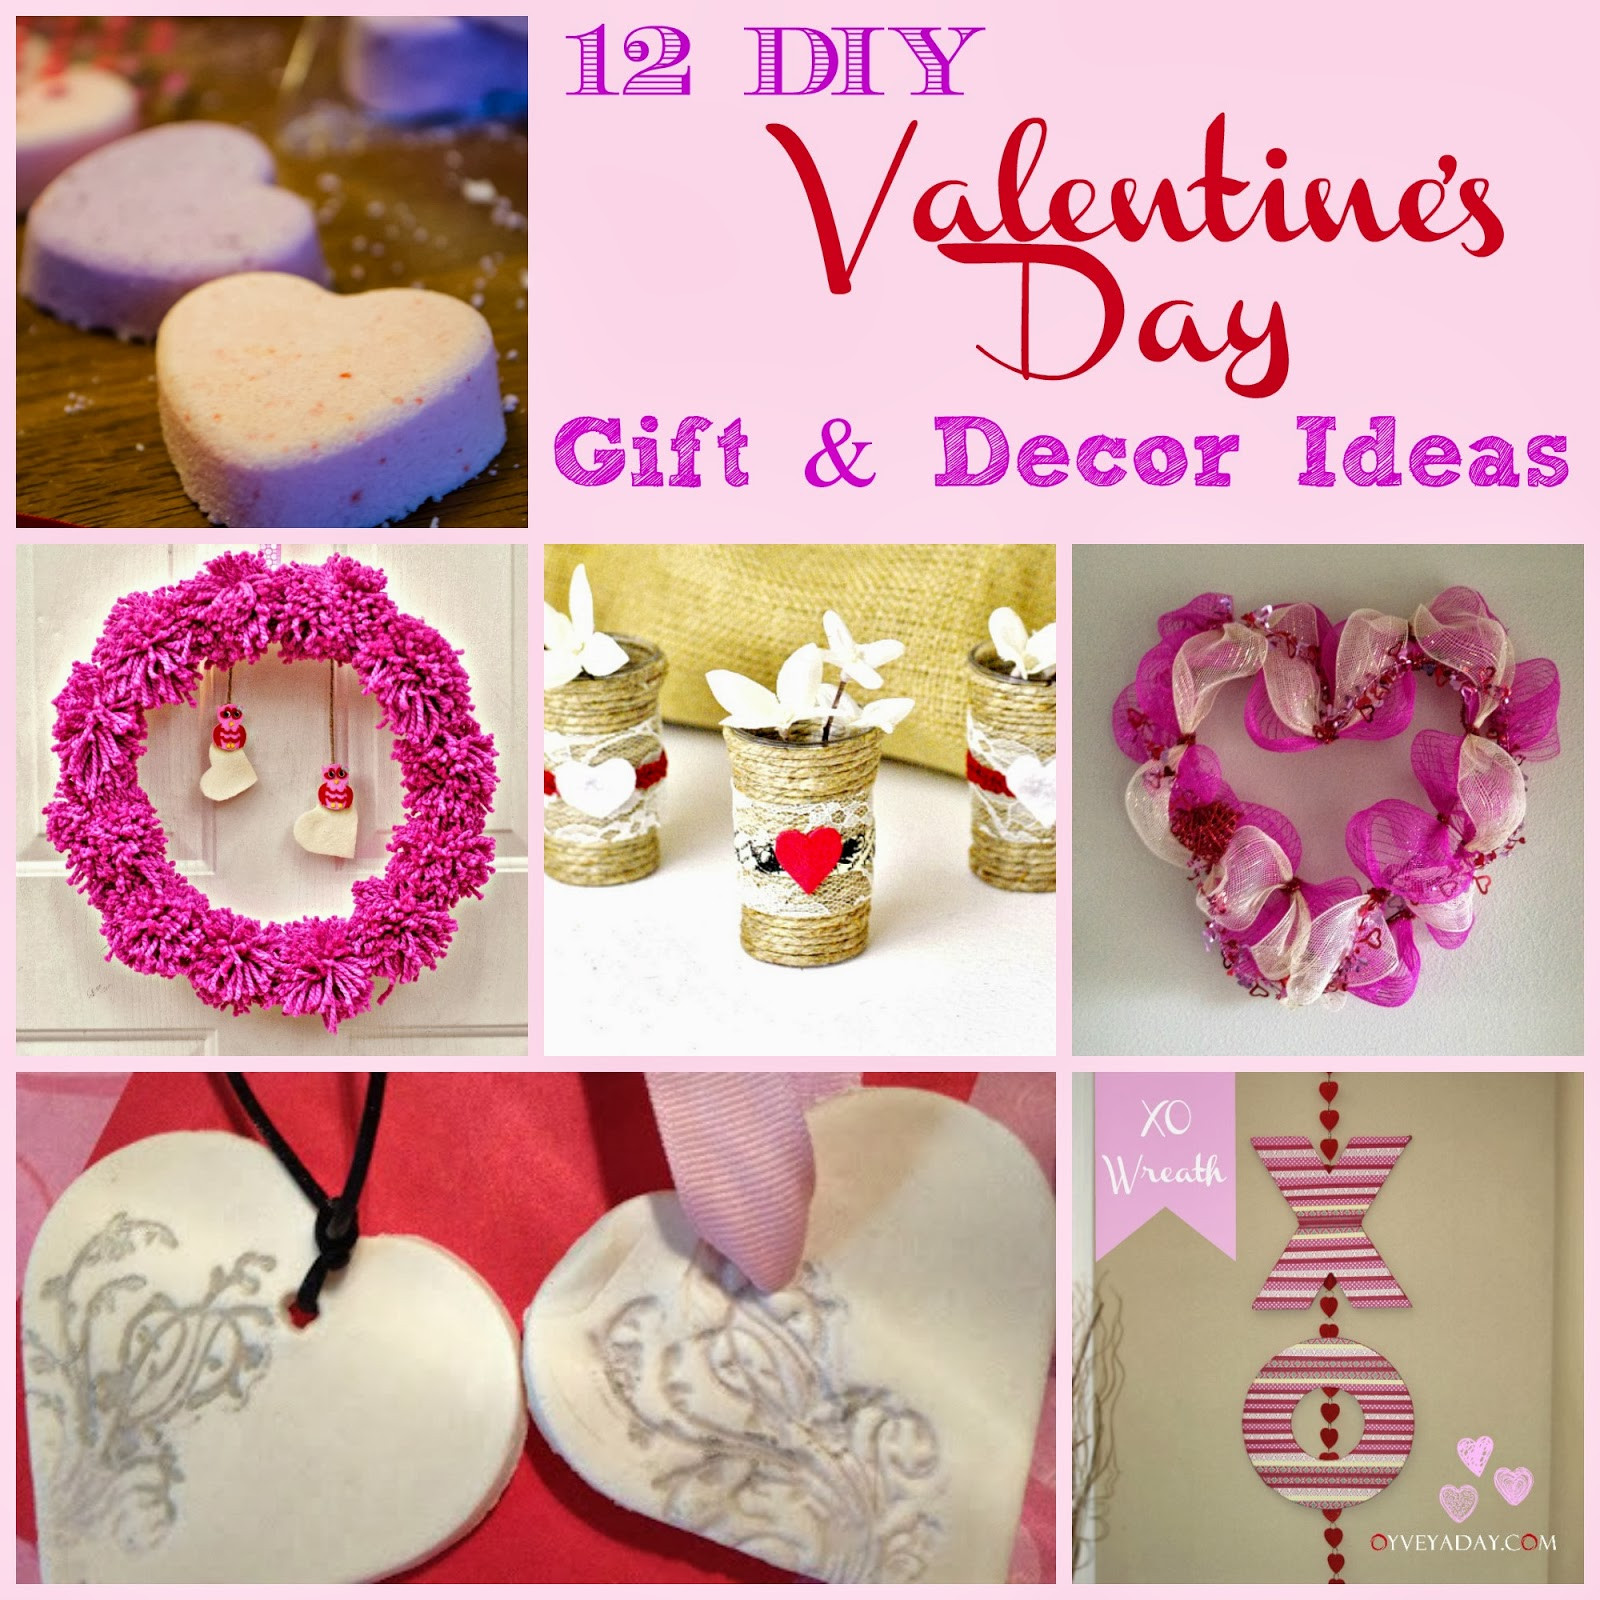 Diy Valentines Day
 12 DIY Valentine s Day Gift & Decor Ideas Outnumbered 3 to 1